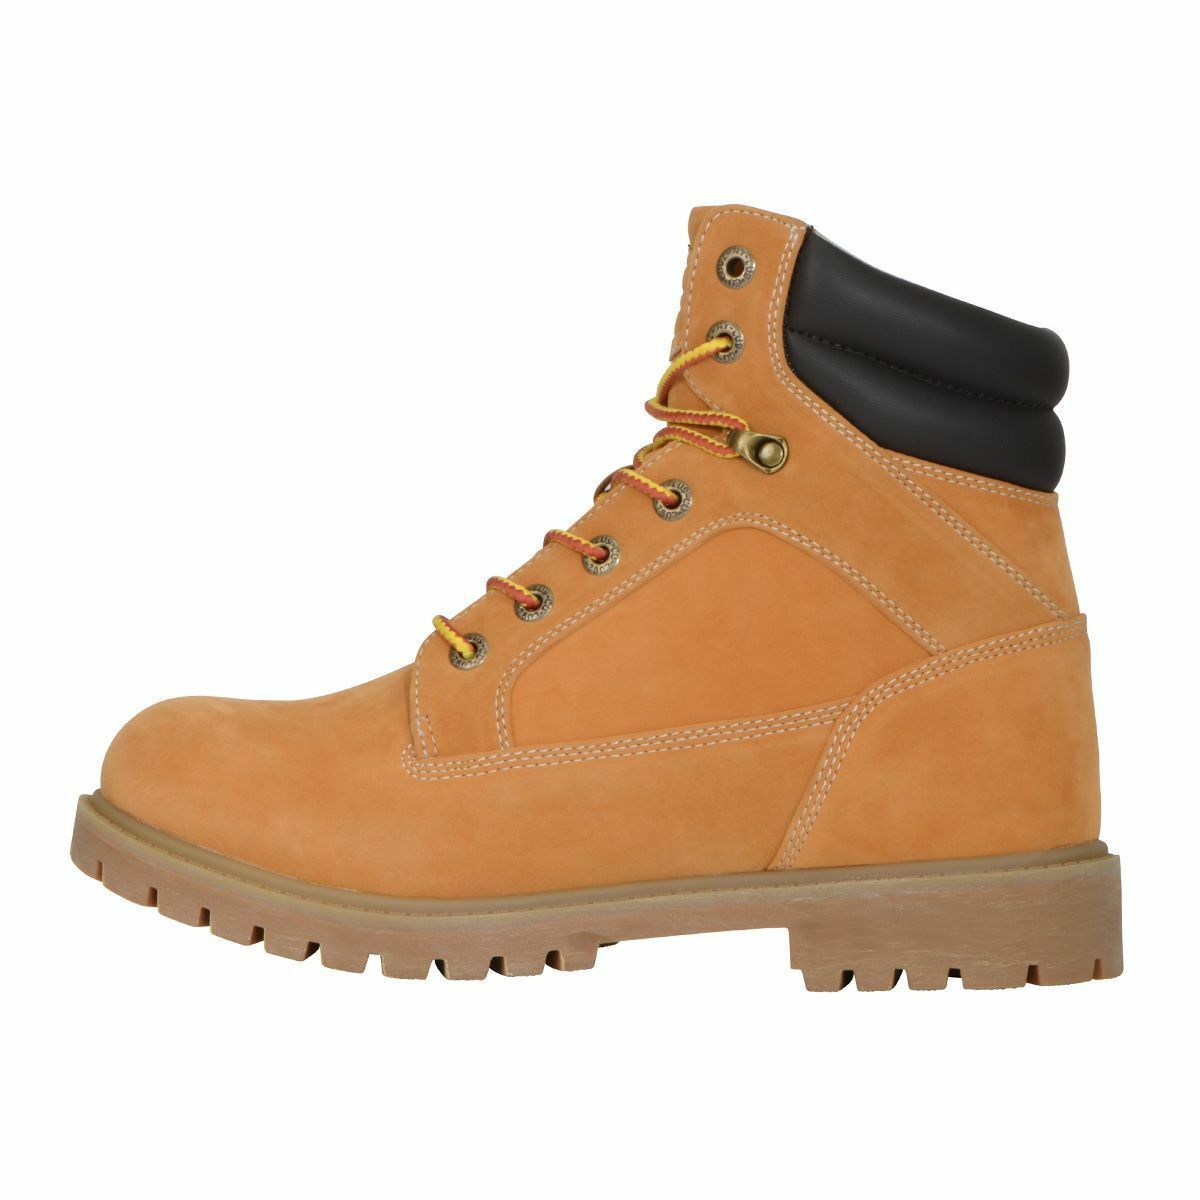 Men’s Lugz Tactic Water Resistant Boot Wheat Size 13 #NMJAE-M493 - Boots